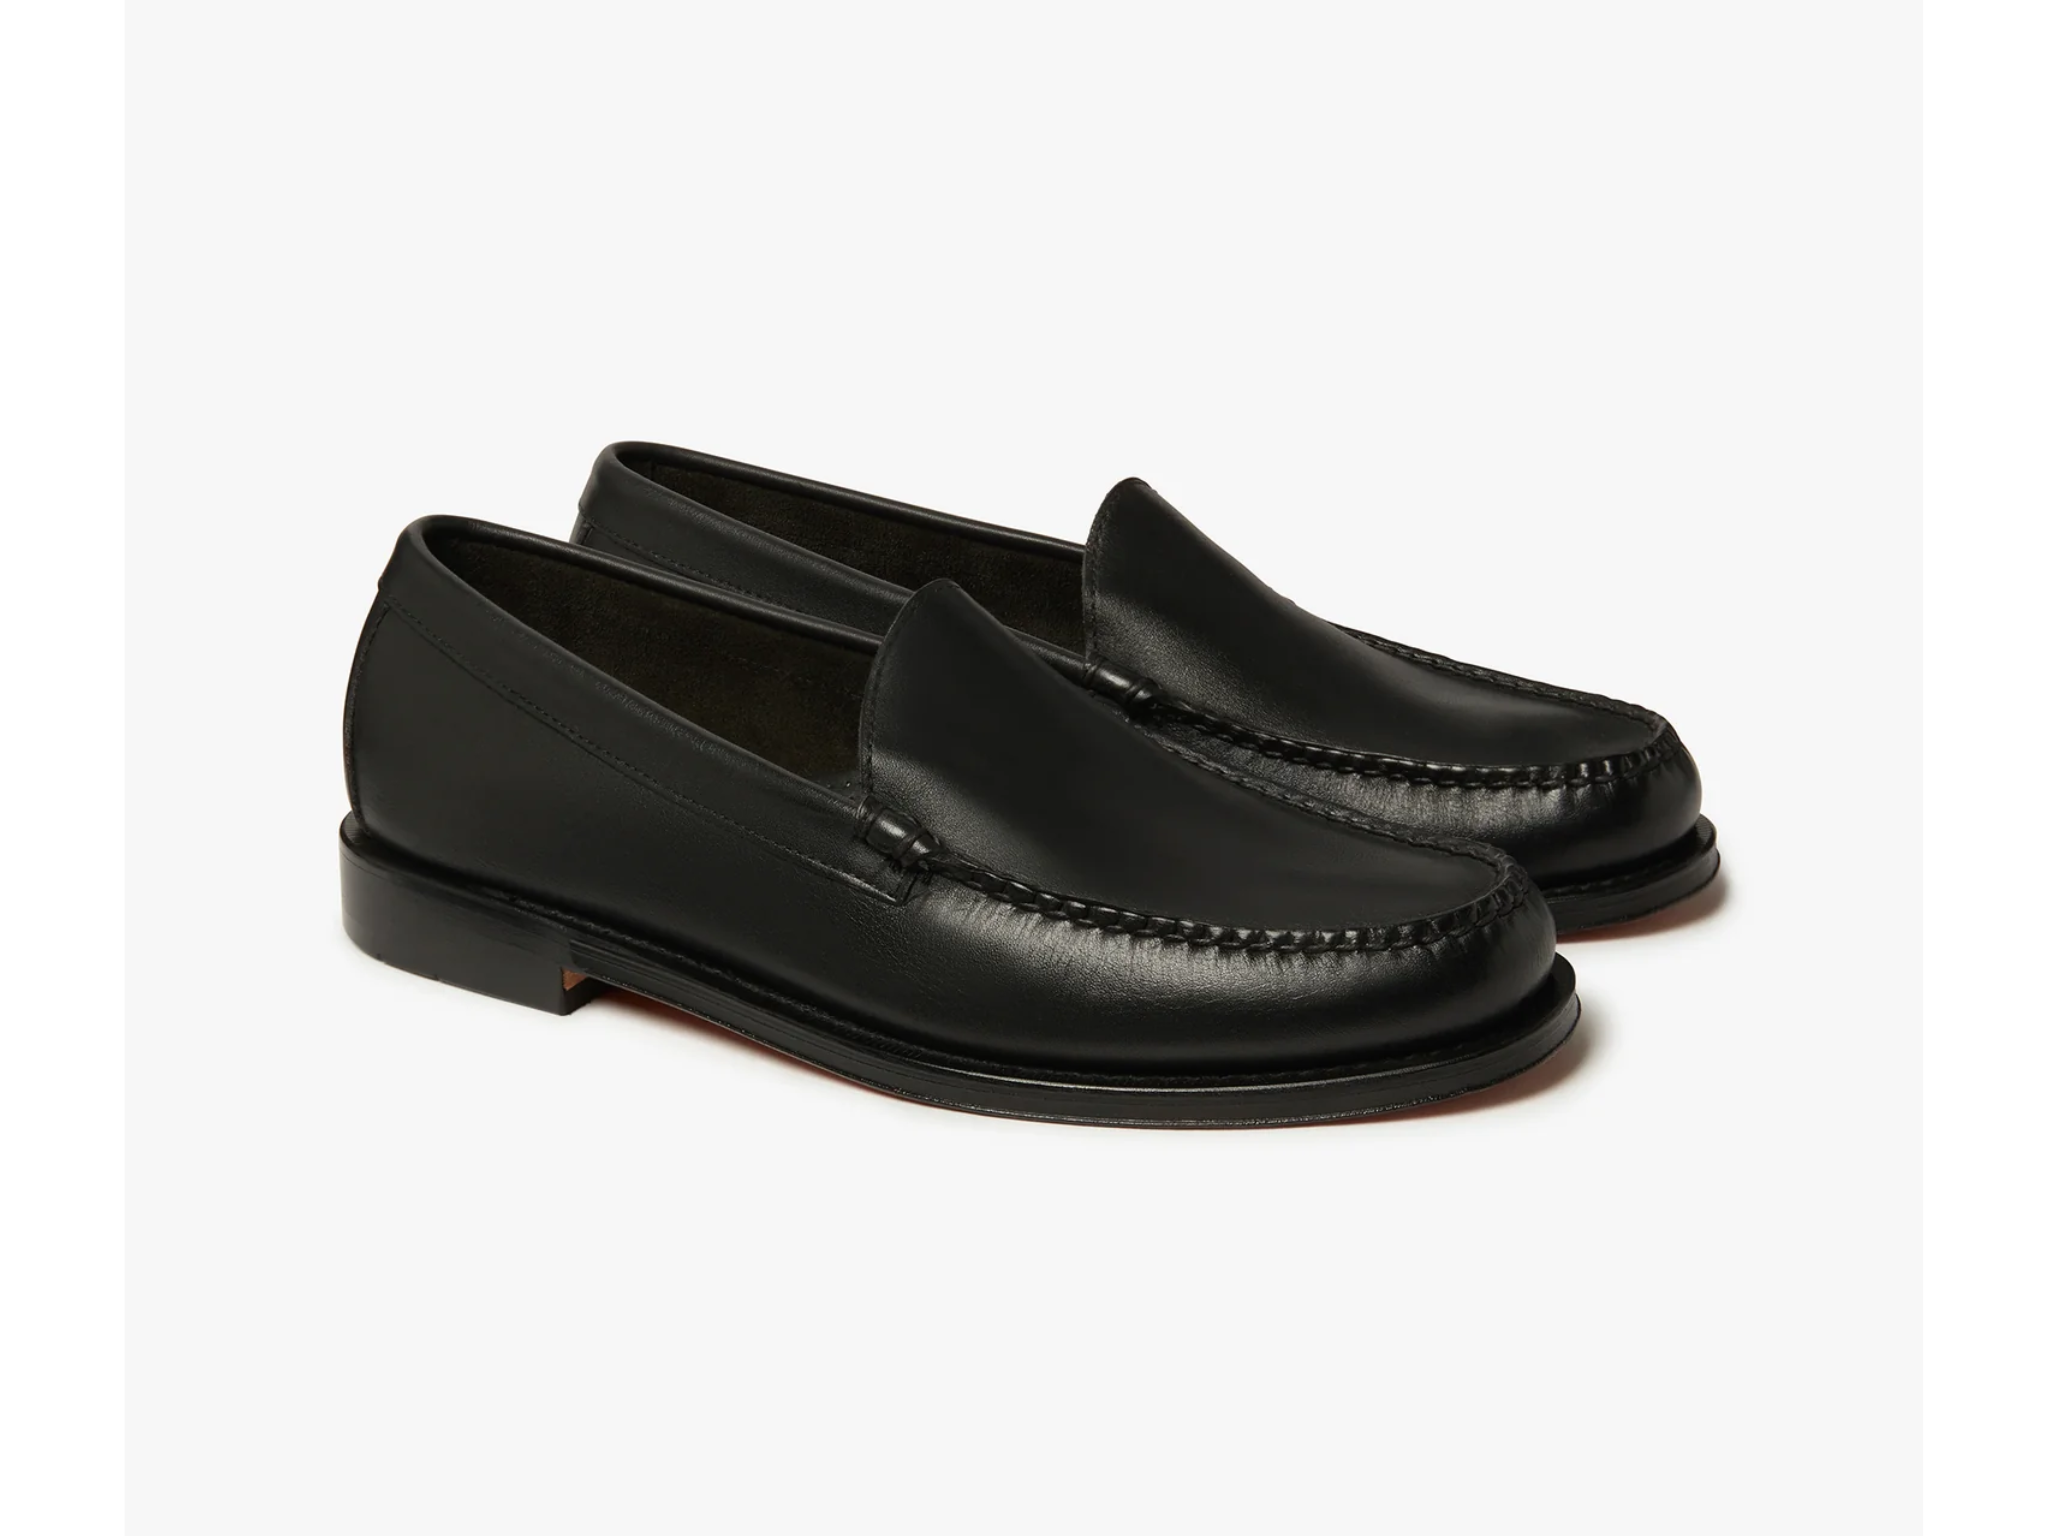 G.H. Bass weejuns venetian loafers